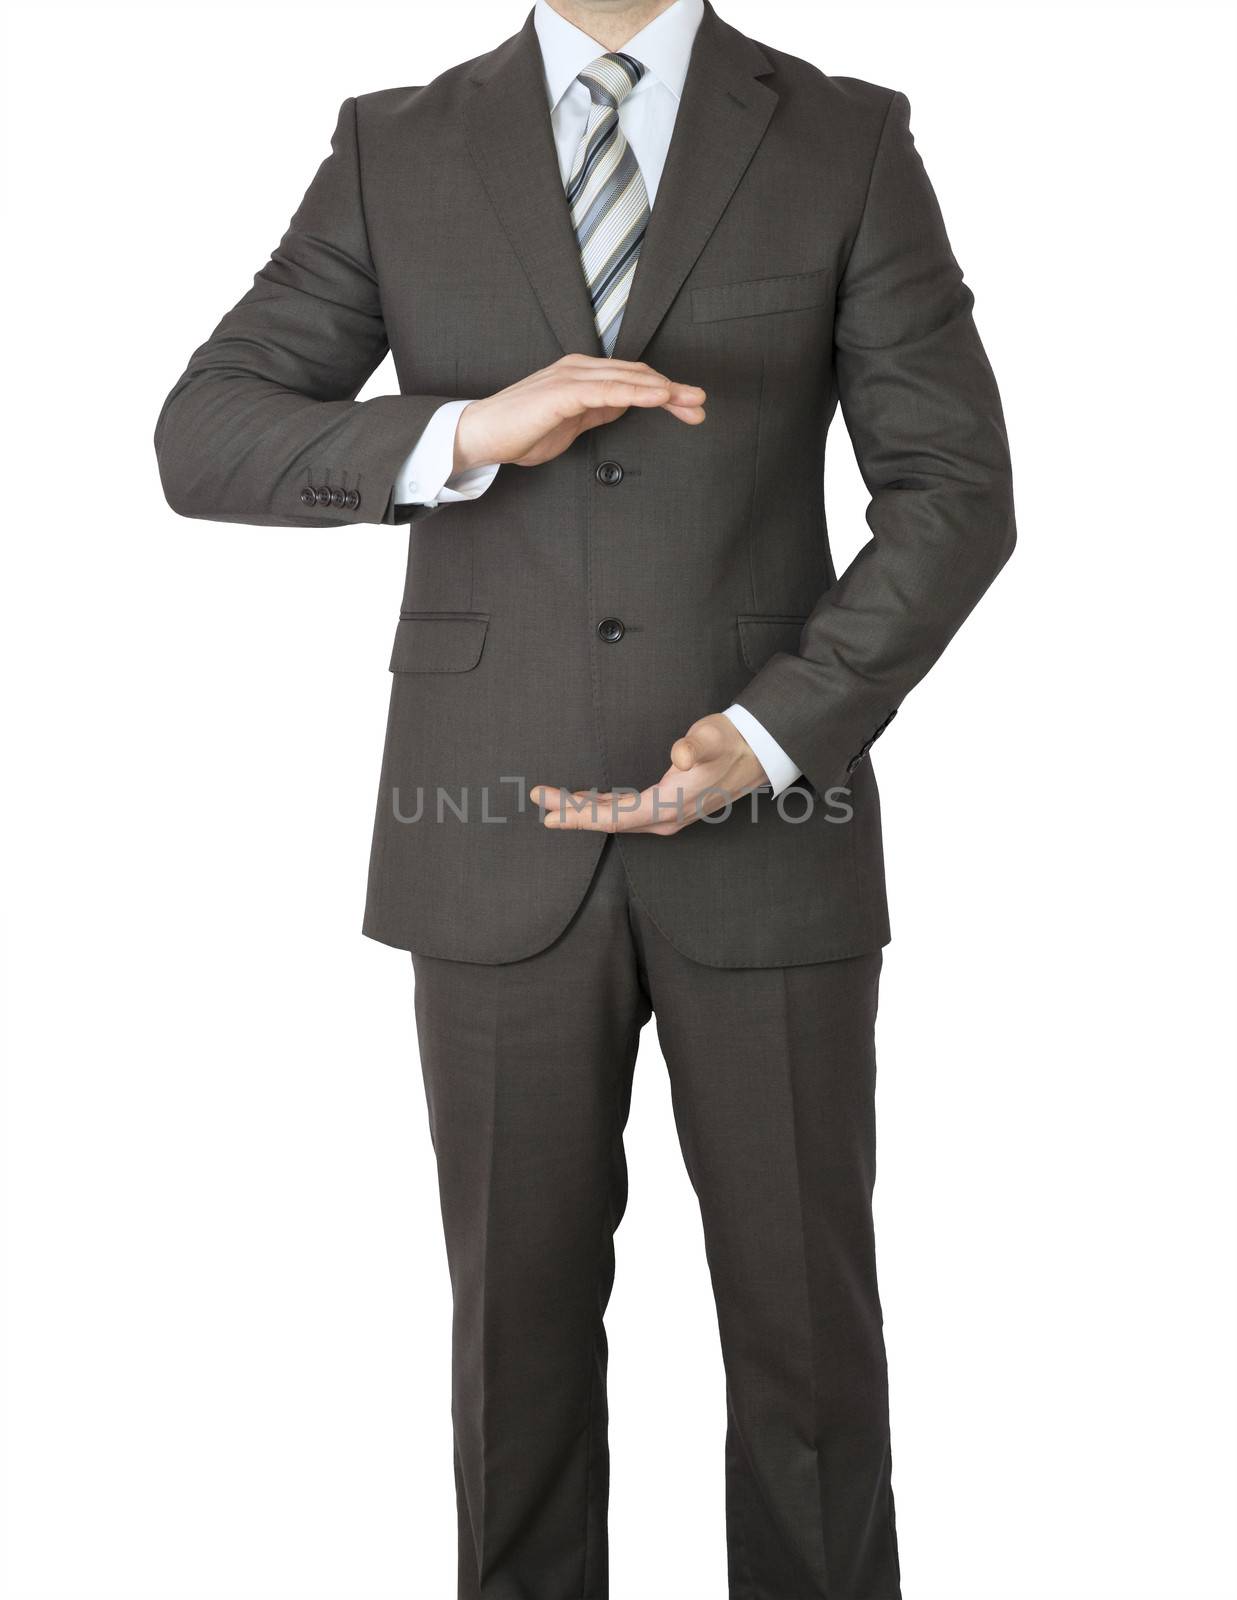 Man in suit holding his hands before him. Crop